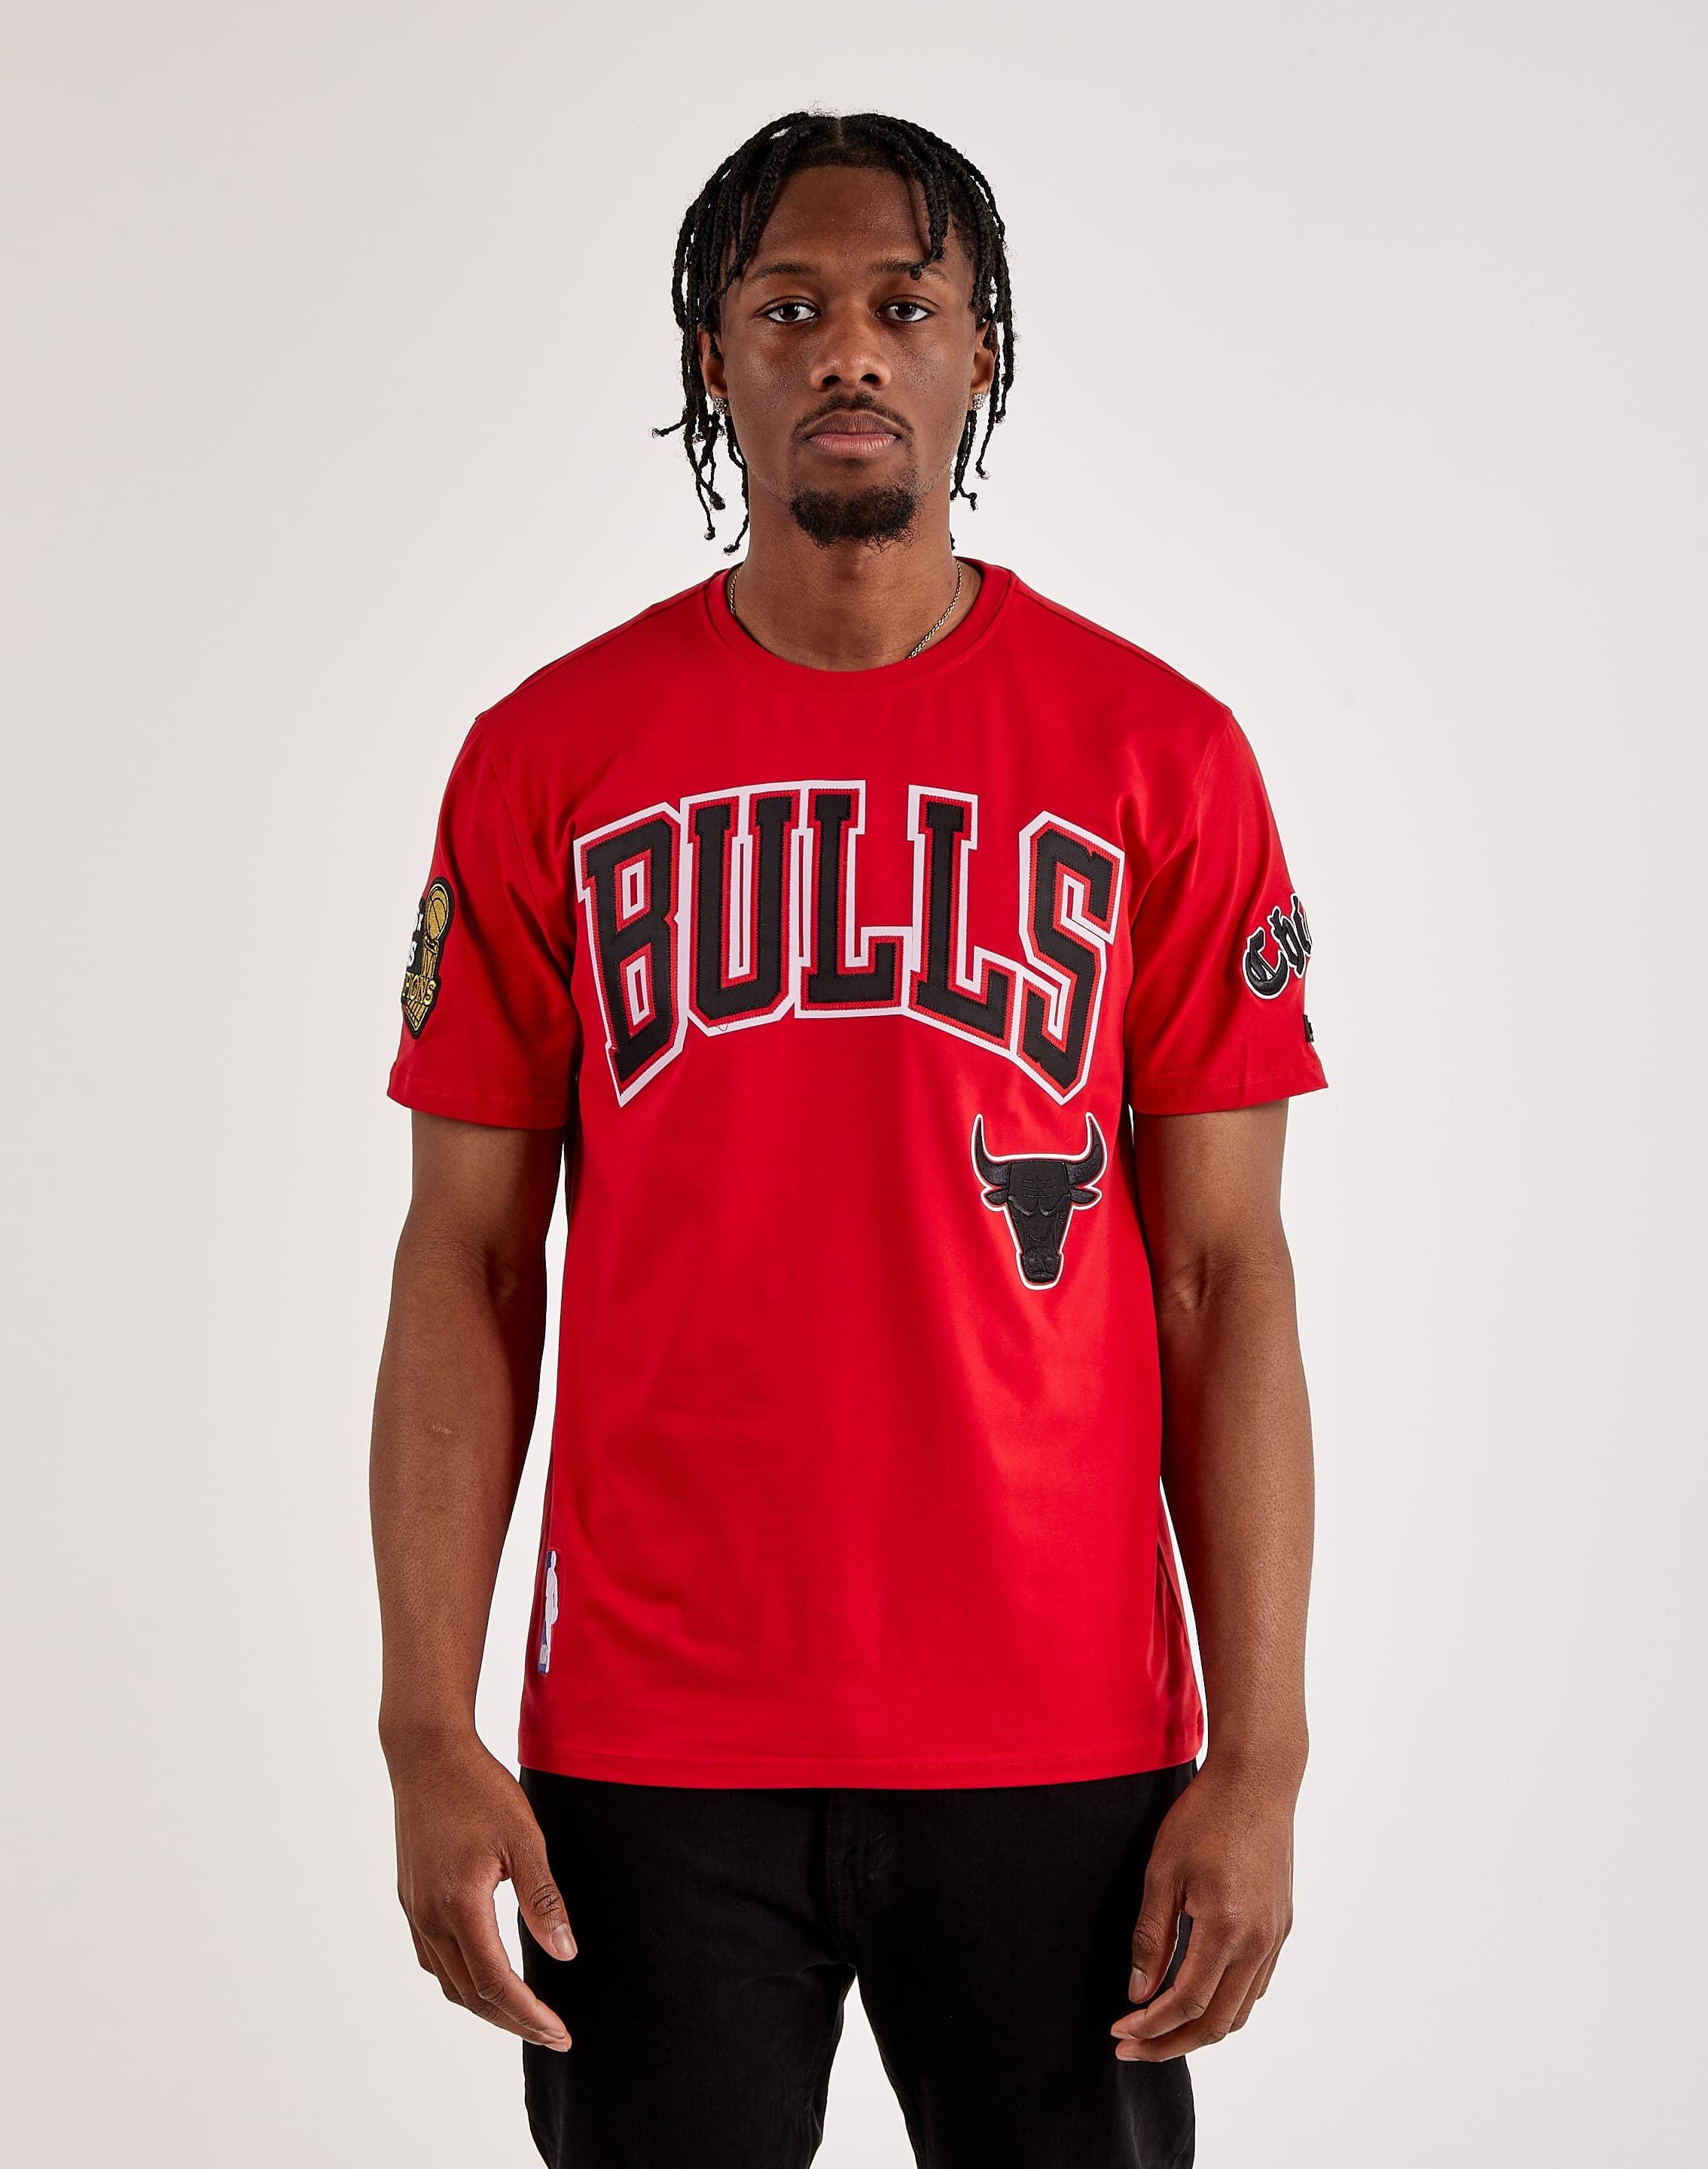 chicago bulls see red t shirt